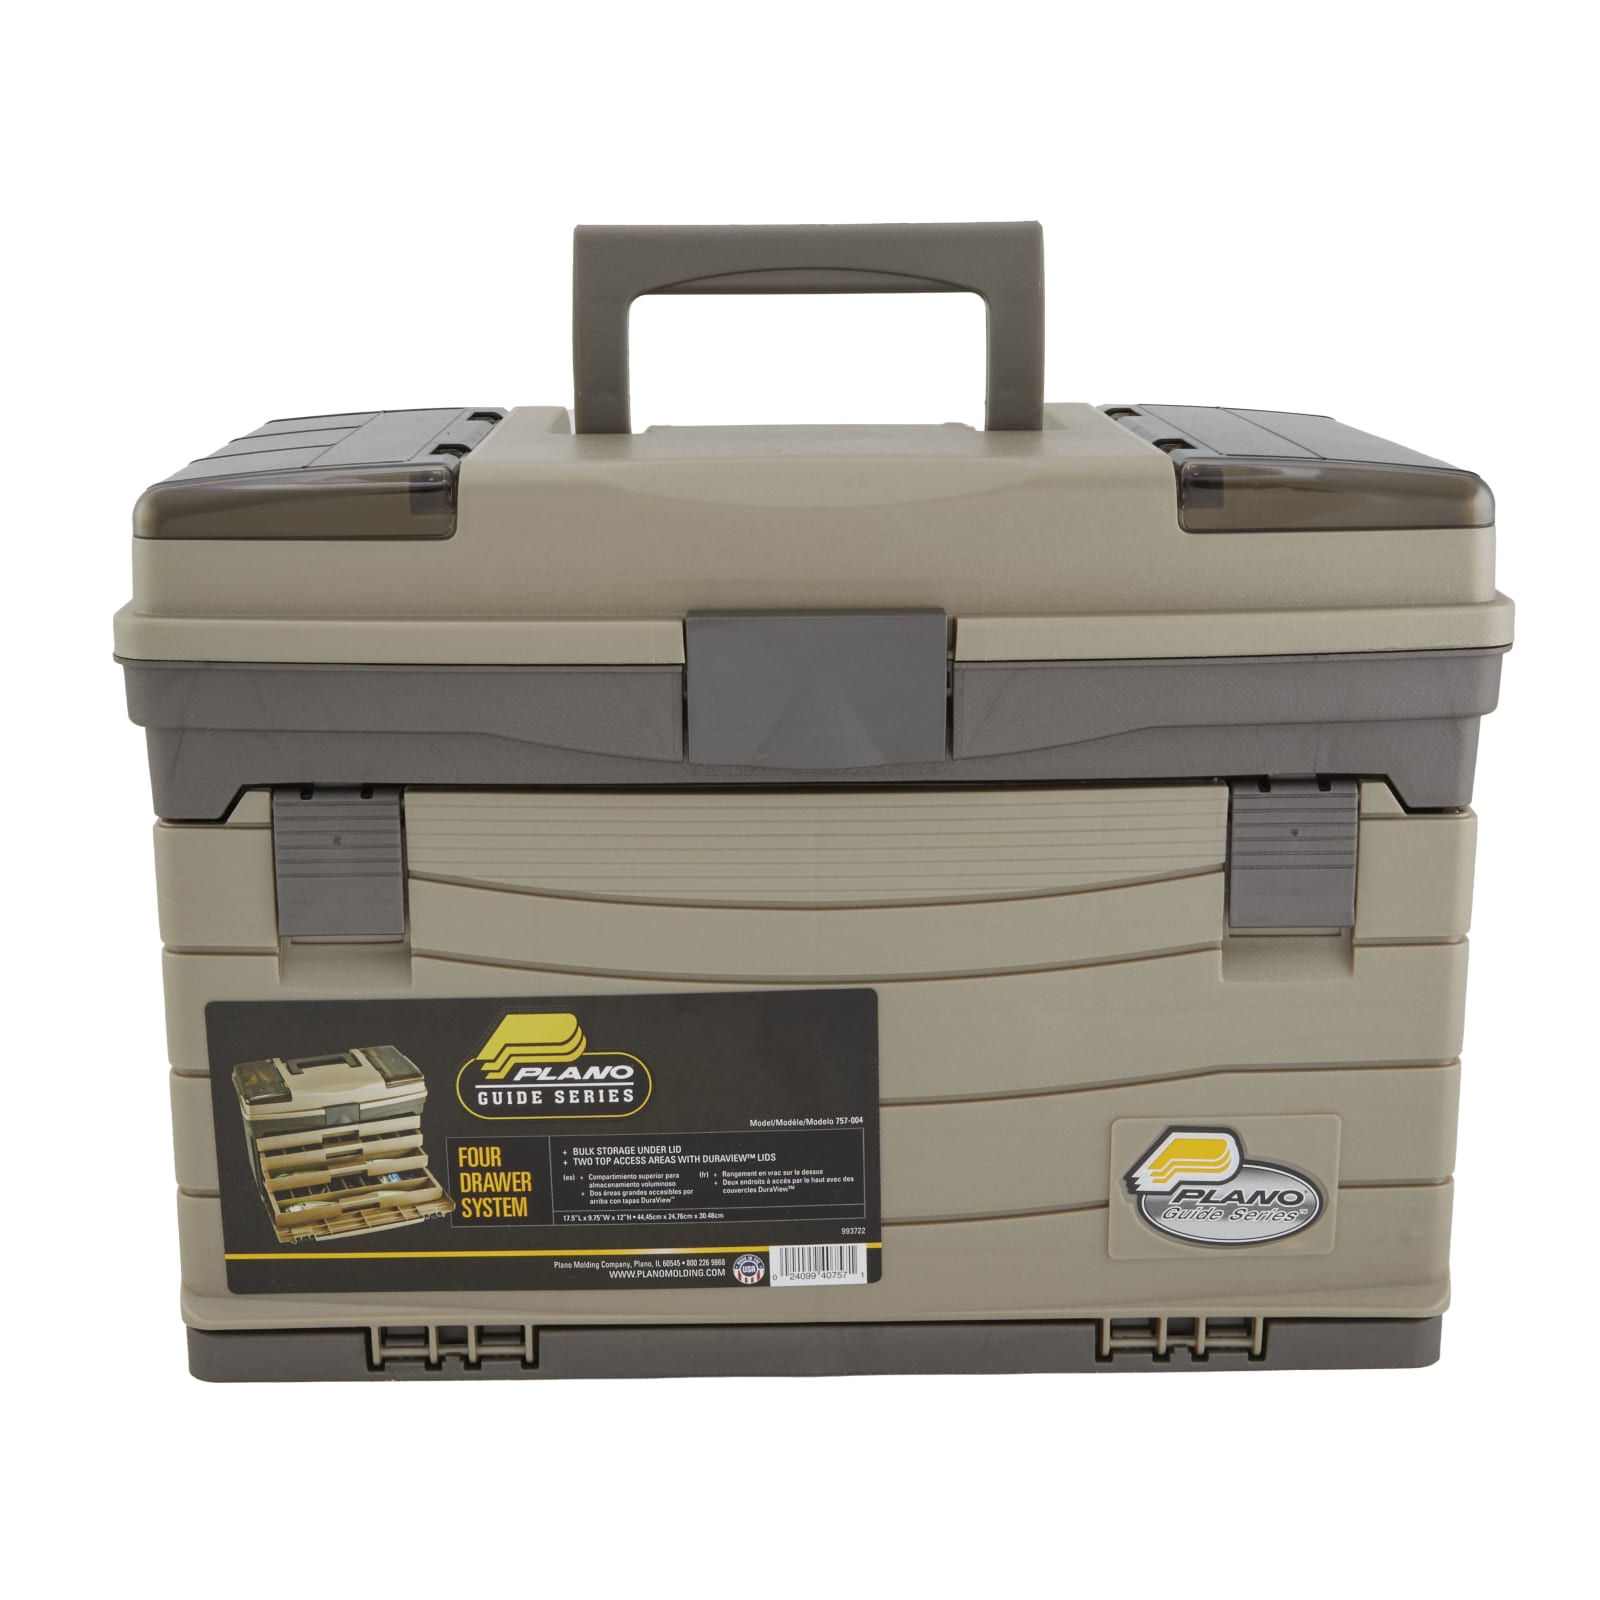 Guide Series Graphite/Sandstone Drawer Tackle Box by Plano at